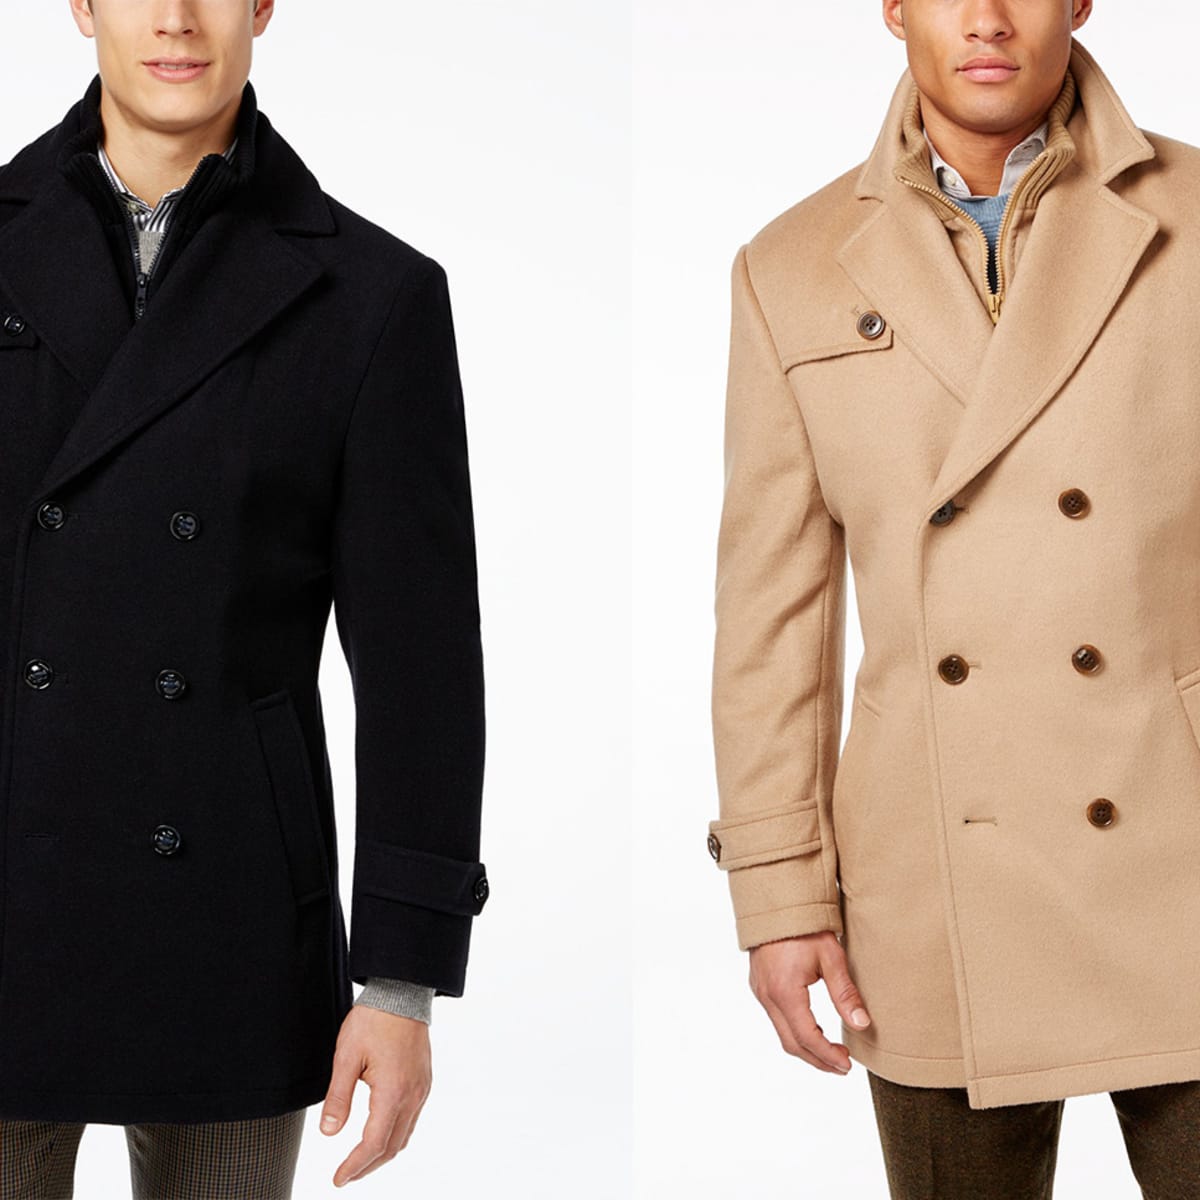 Save An Additional 25% On This Ralph Lauren Peacoat On Sale At Macy's -  Men's Journal